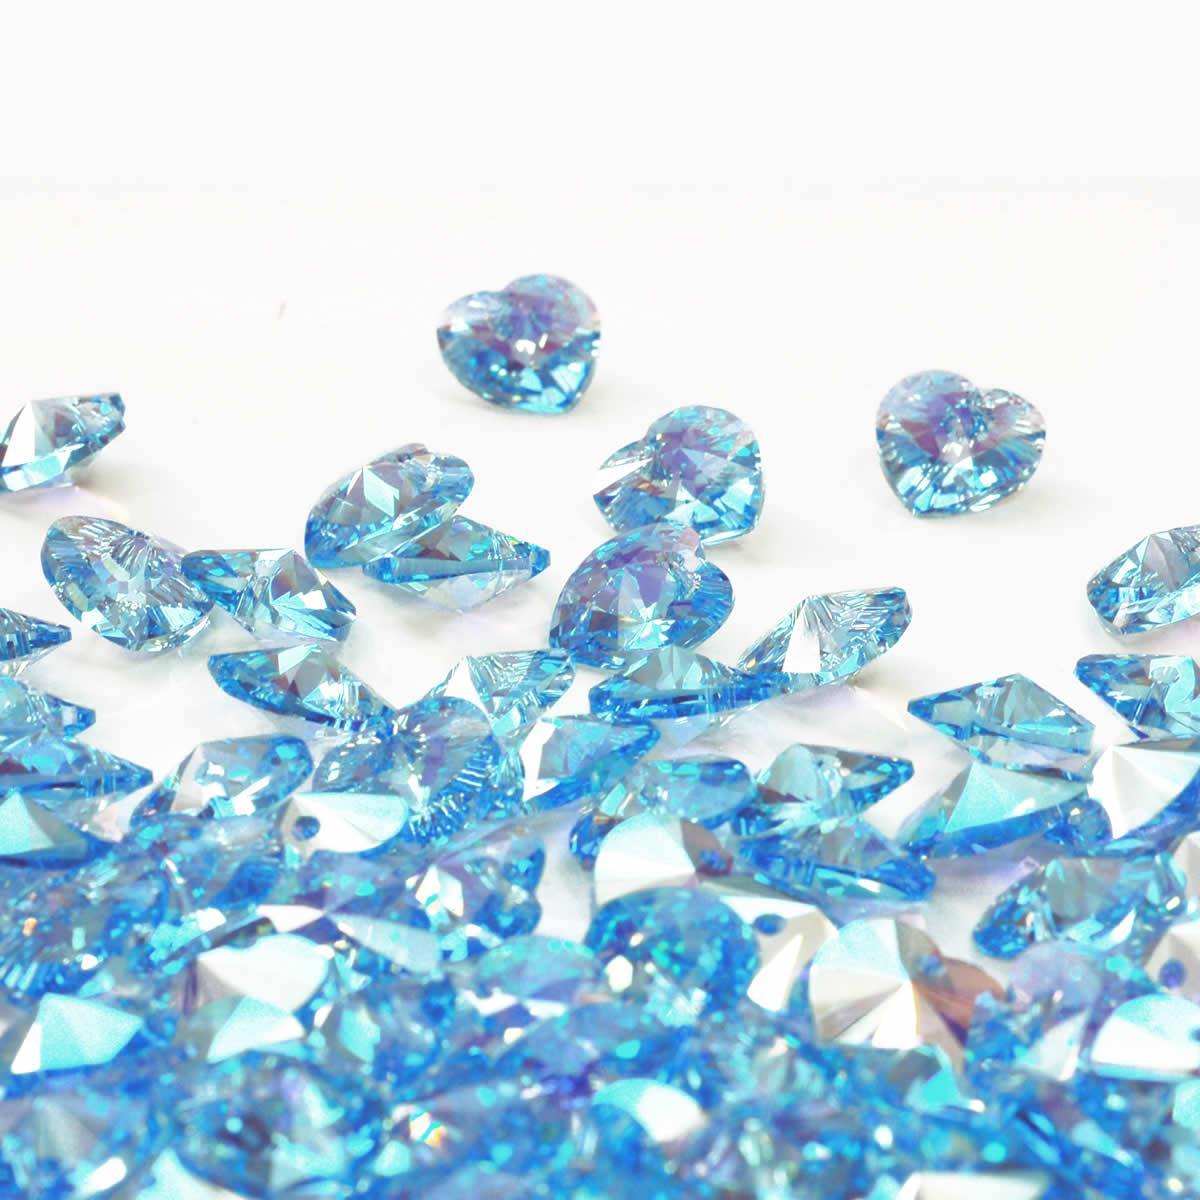 Aquamarine crystals for march birthstone The Luxe Co